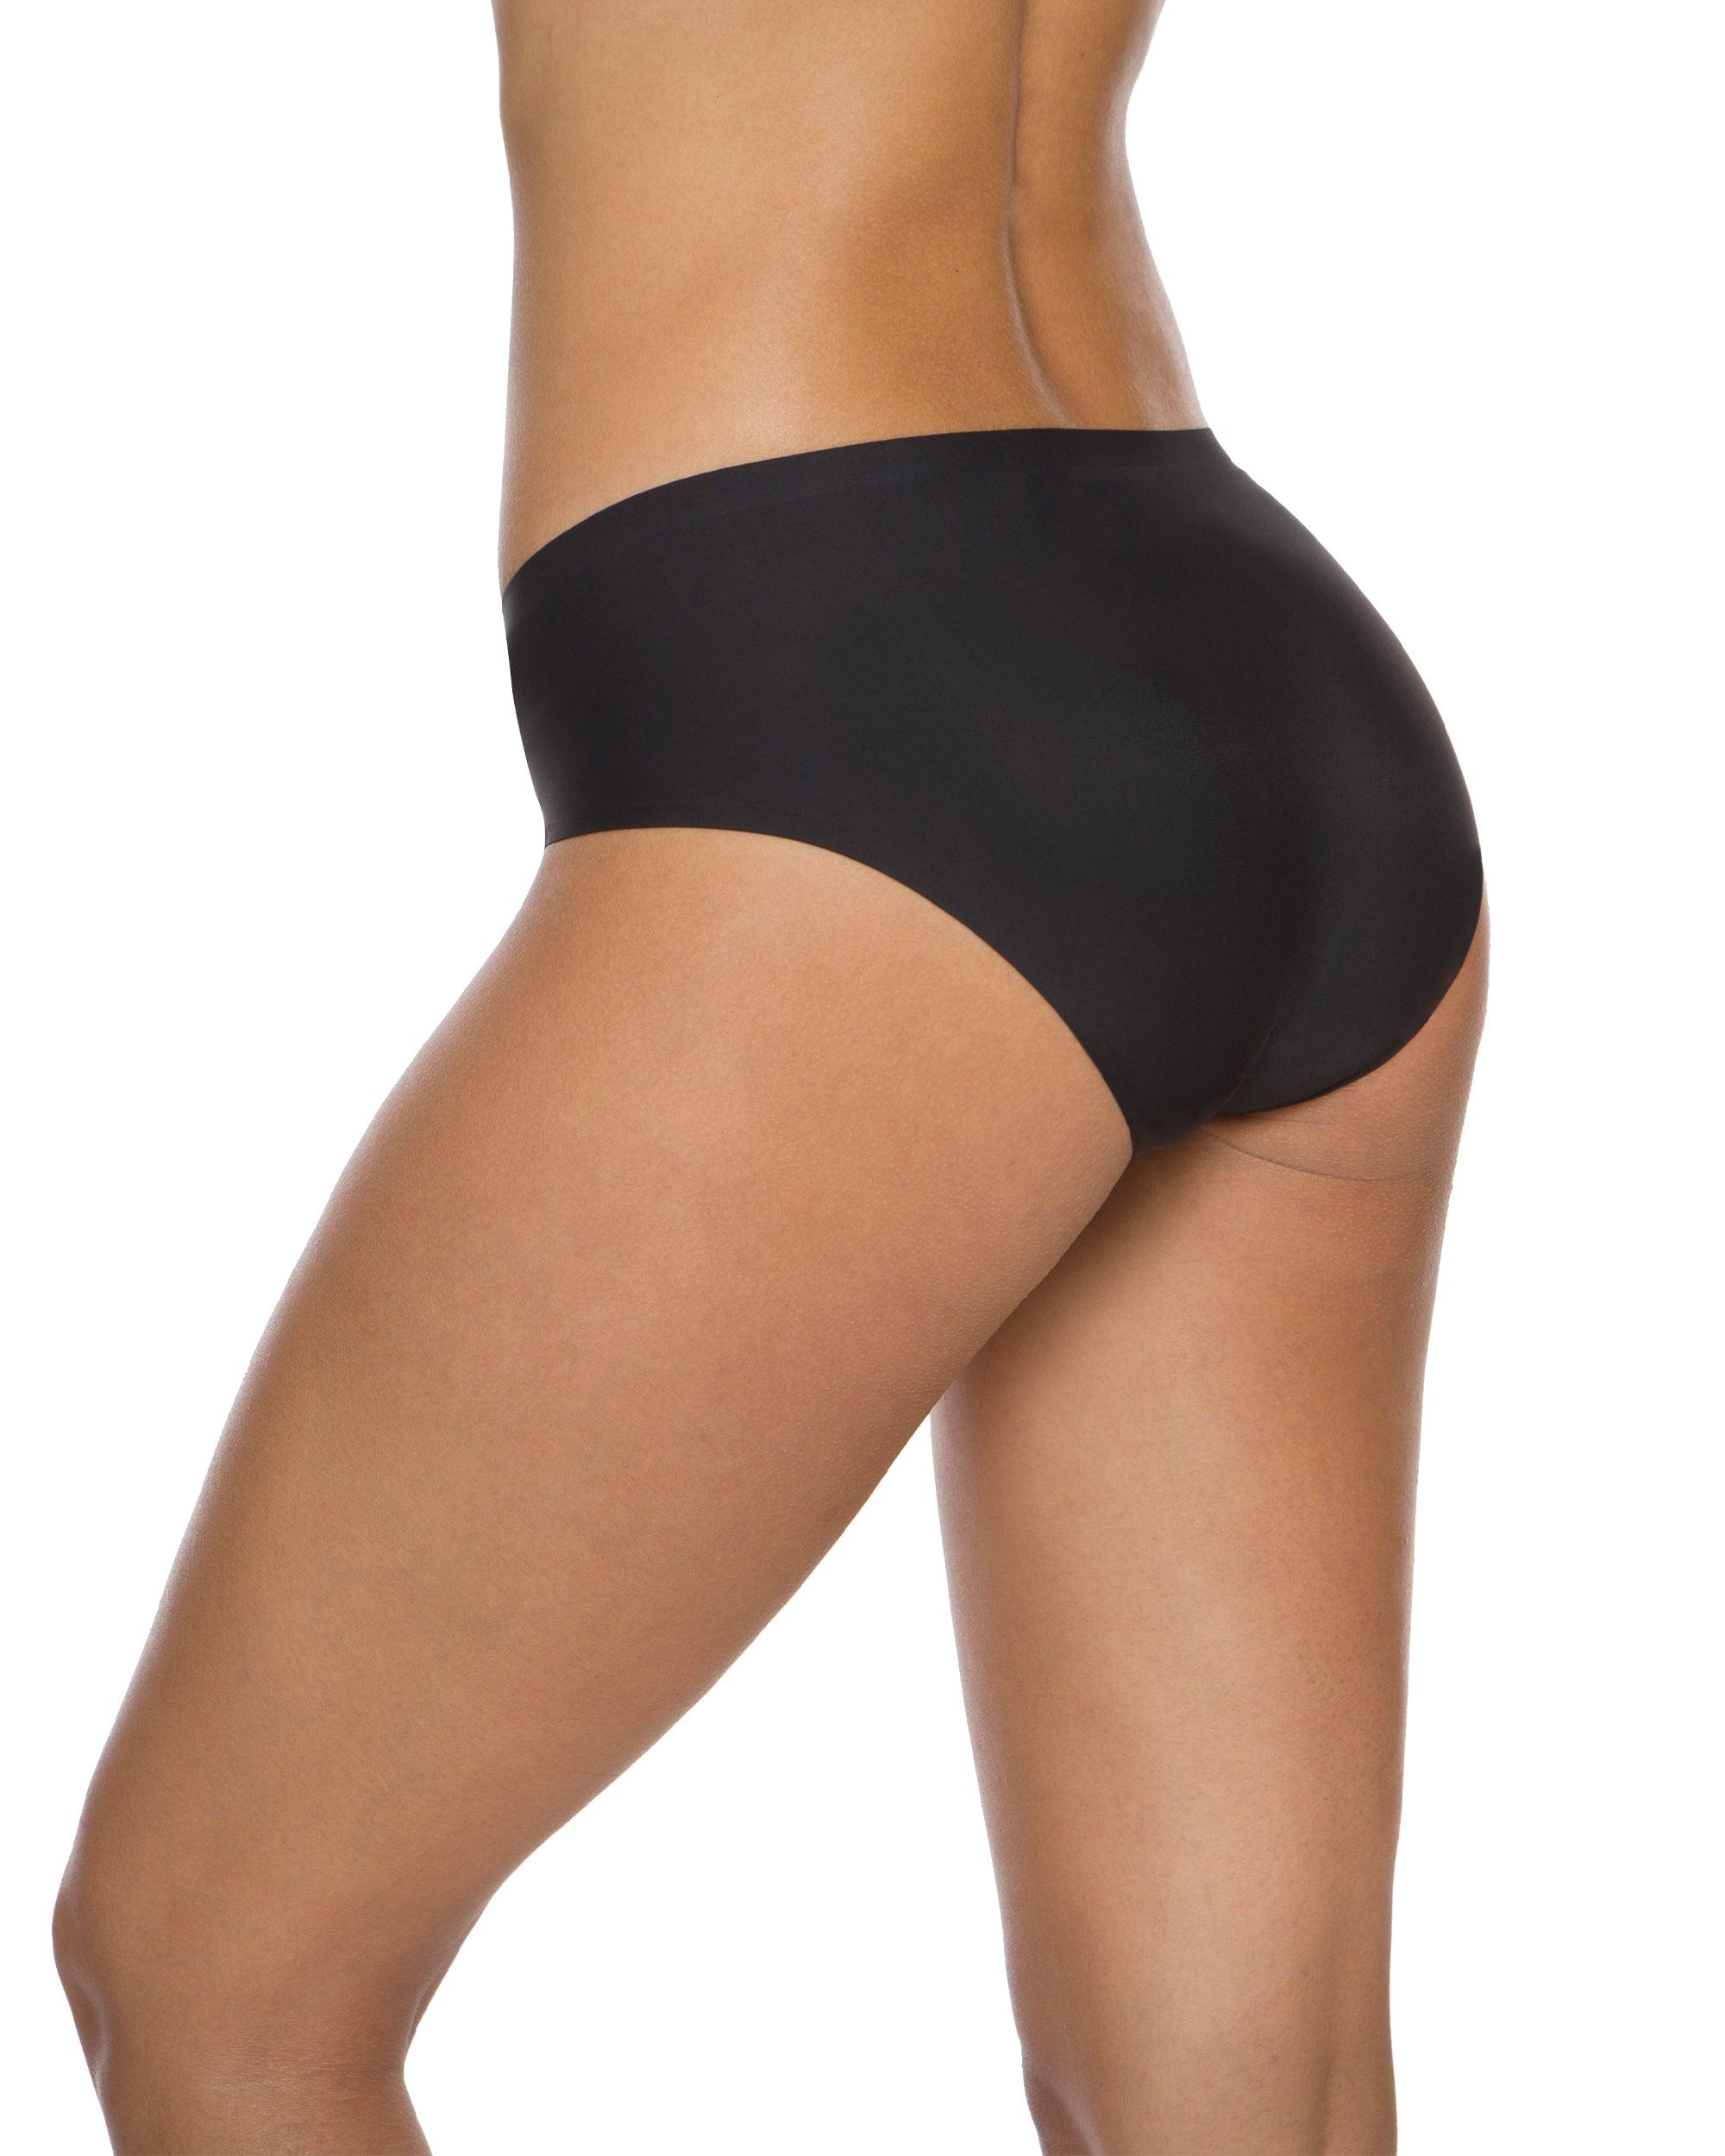 ALTHEANRAY Women’s Seamless Hipster-color 13